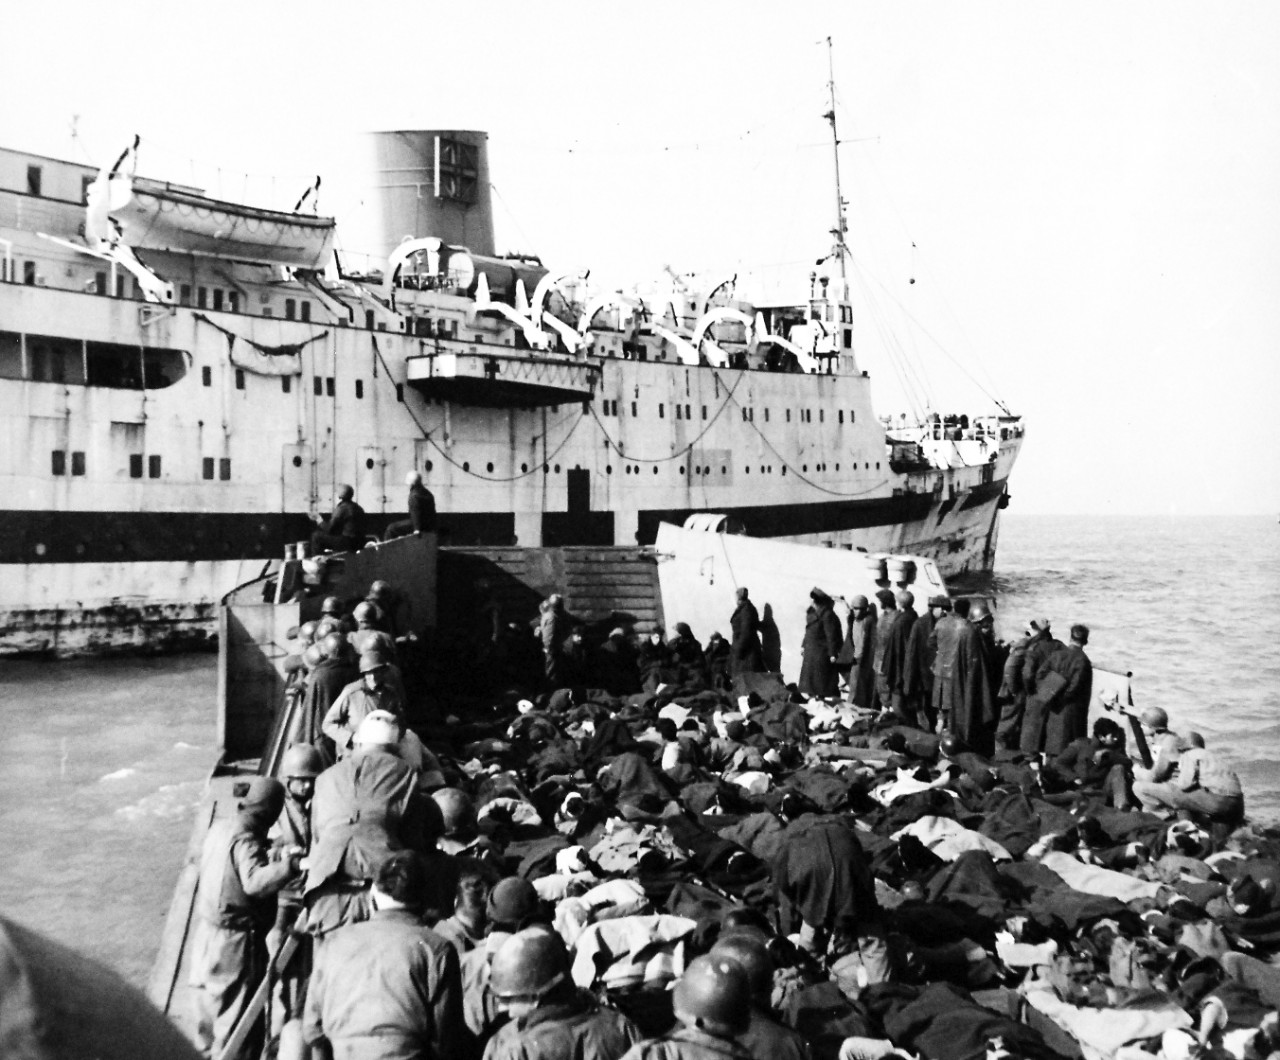 80-G-58426:  Battle of Anzio, January-June 1944.    Americans and English casualties ride out to the hospital ship RMS Leinster in the Anzio harbor aboard an LCT.  Hospital corpsmen and Red Cross workers accompany them.     Photographed March 3,  1944.  Official U.S. Navy photograph, now in the collections of the National Archives.  (2016/06/28).